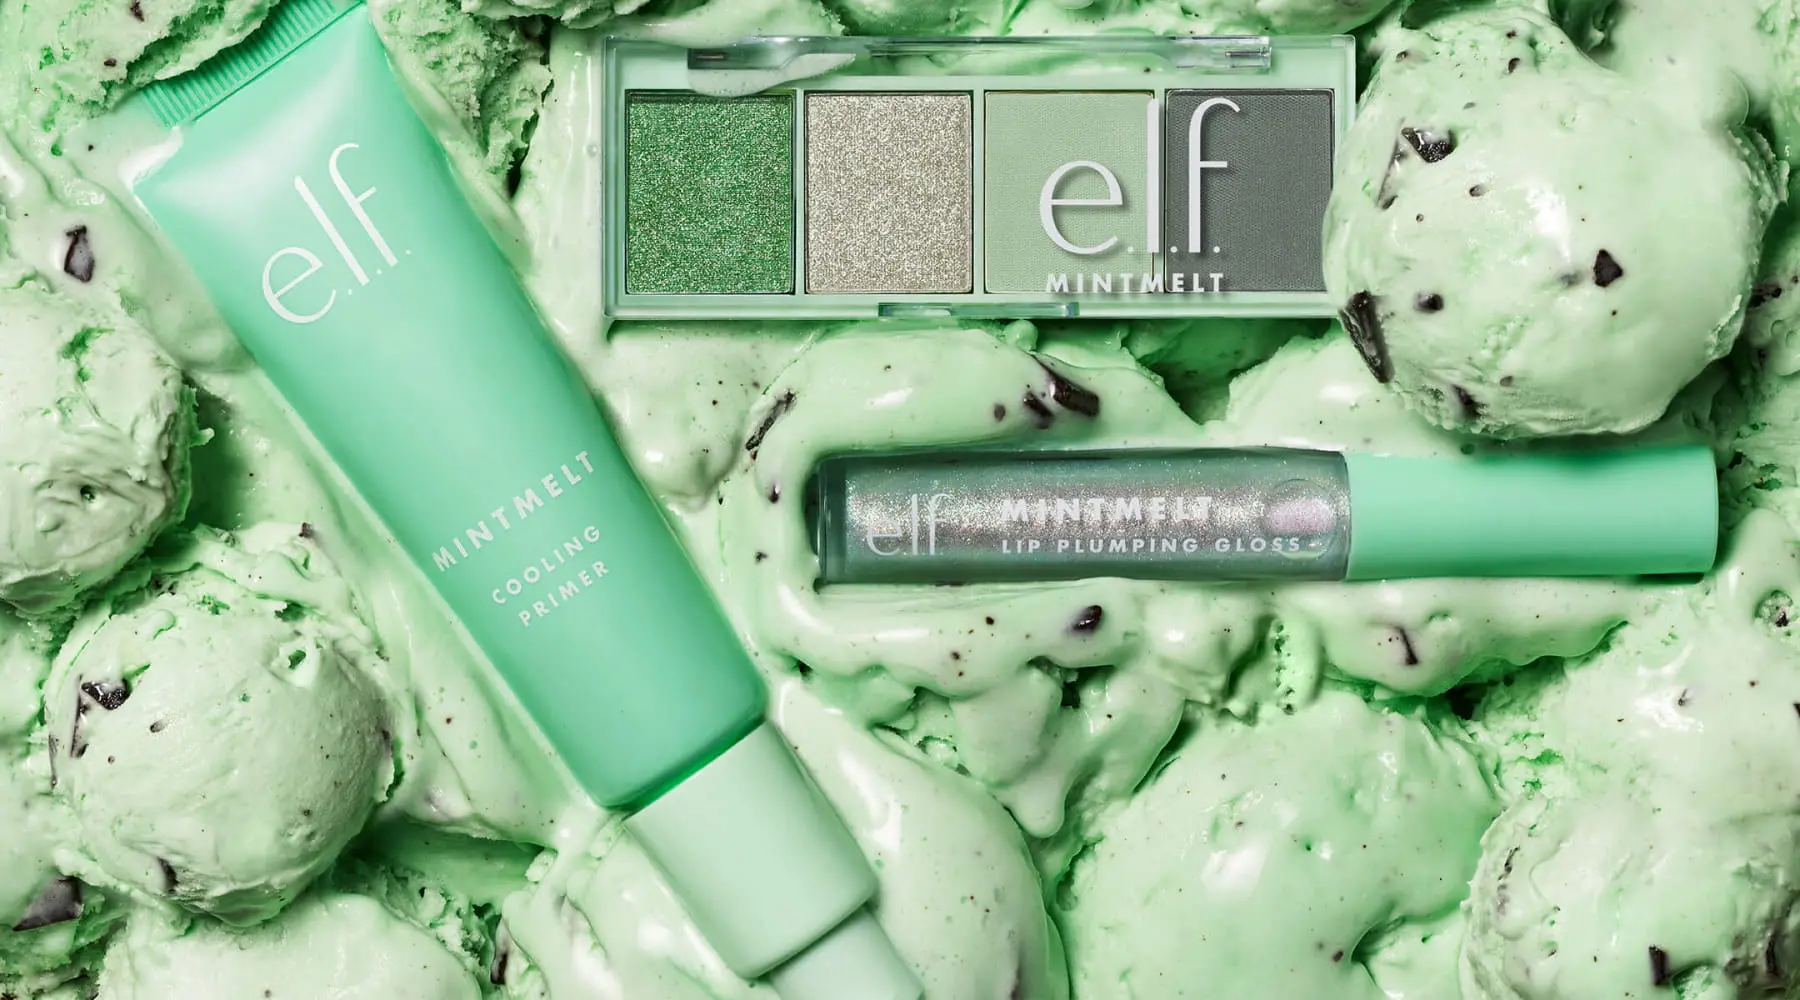 E.l.f. Cosmetics introduced a new mint collection